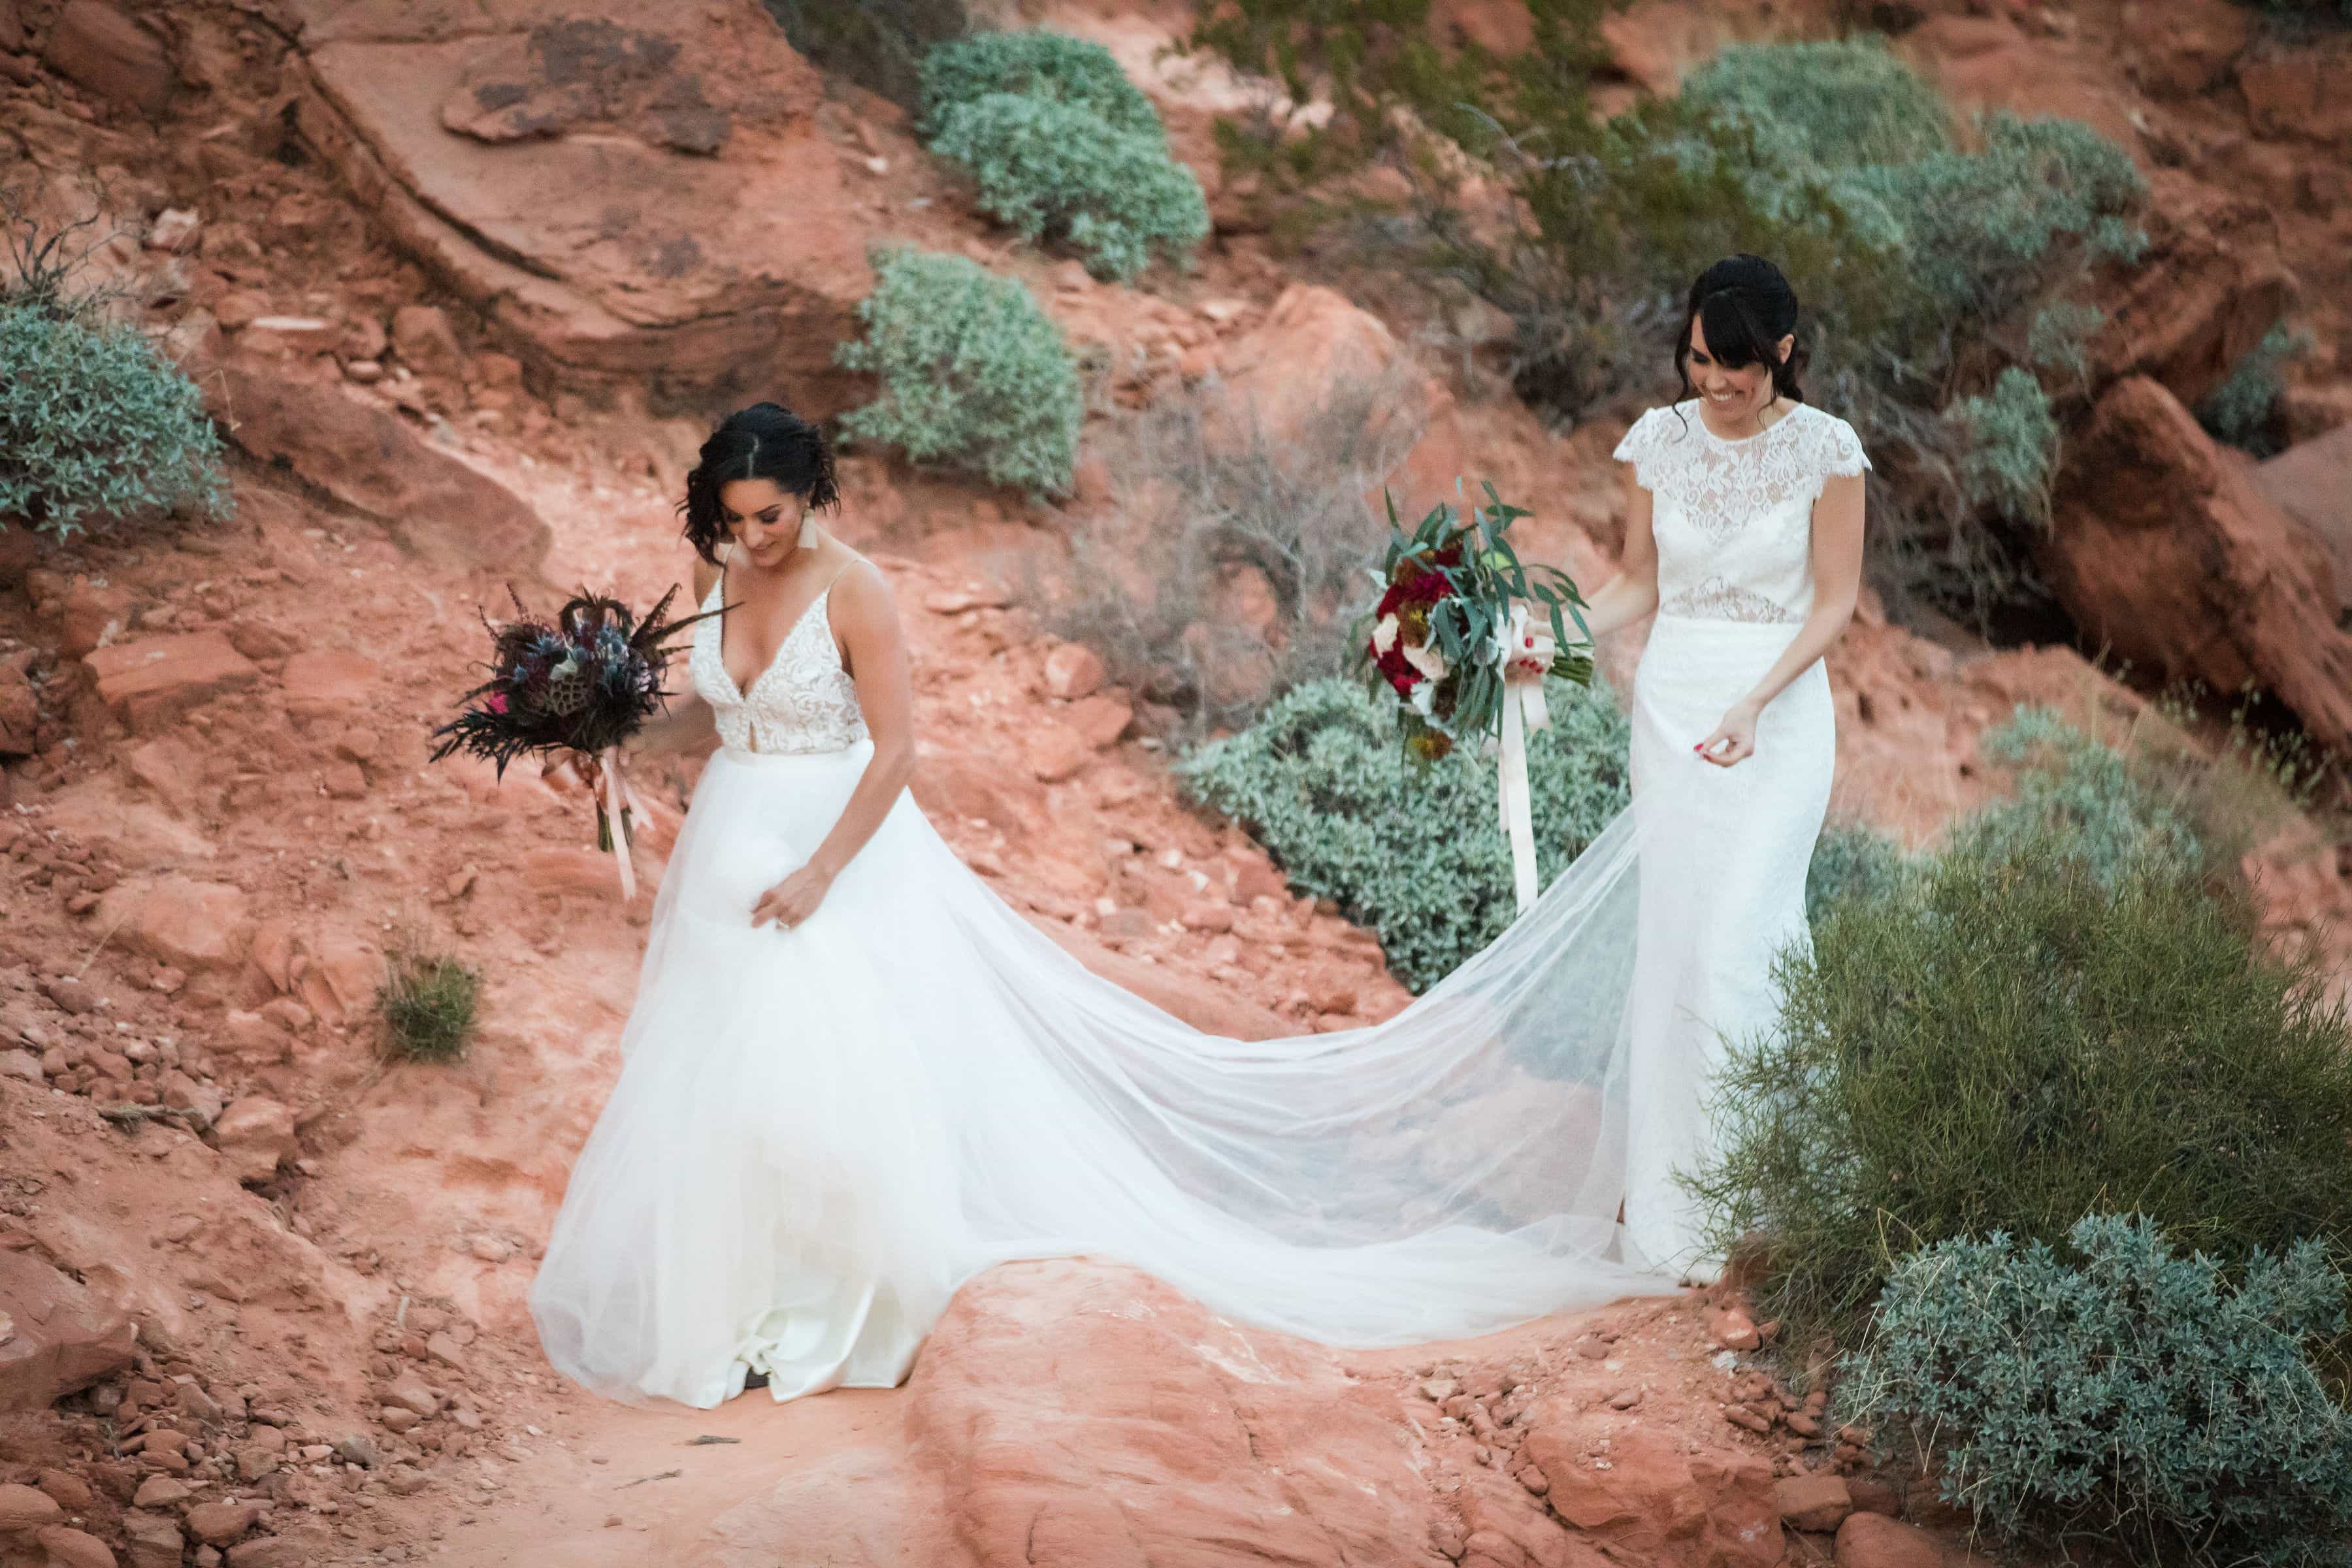 Two brides walking through the Valley of Fire State Park landscape.